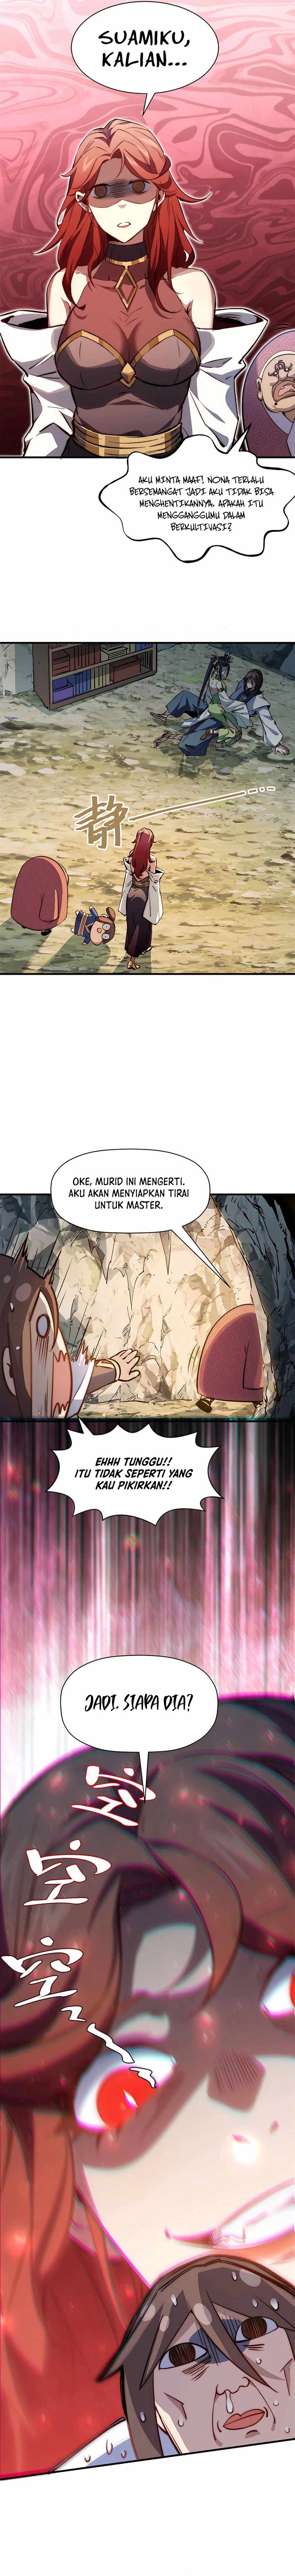 Dilarang COPAS - situs resmi www.mangacanblog.com - Komik top tier providence secretly cultivate for a thousand years 129 - chapter 129 130 Indonesia top tier providence secretly cultivate for a thousand years 129 - chapter 129 Terbaru 11|Baca Manga Komik Indonesia|Mangacan